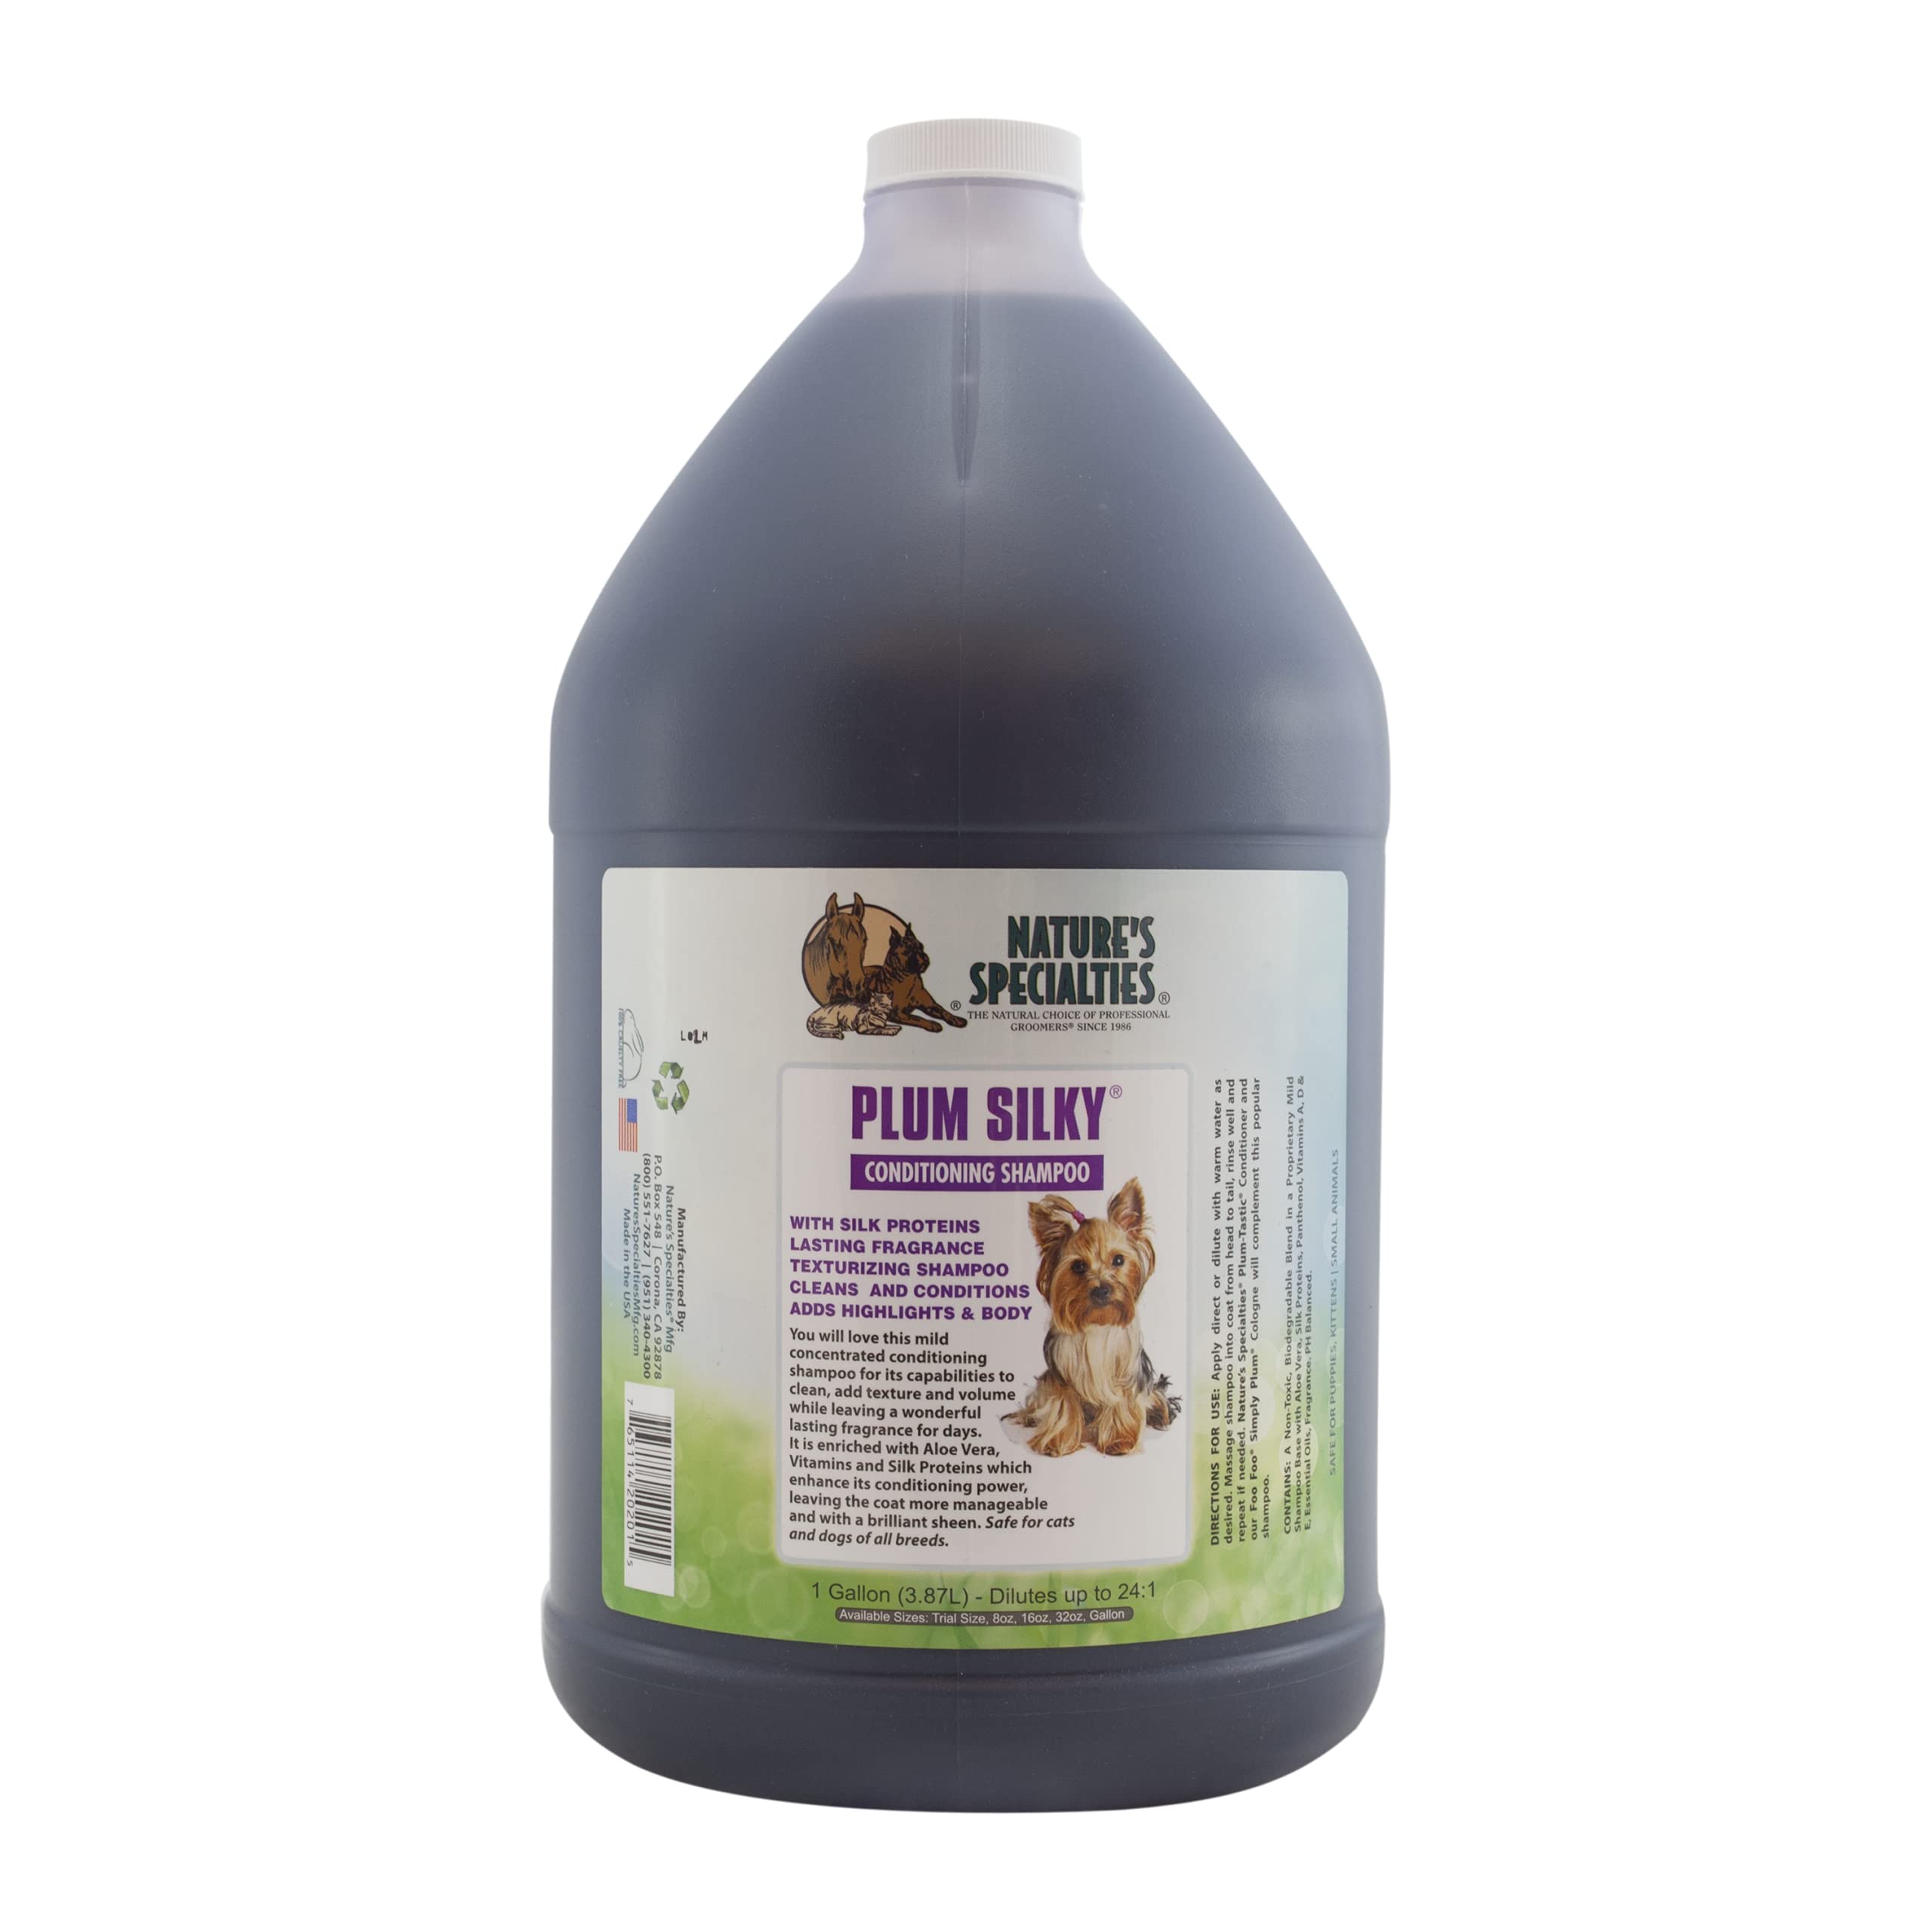 NATURE'S SPECIALTIES Plum Silky Ultra Concentrated Dog Shampoo Conditioner, Makes up to 24 Bottles, Natural Choice for Professional Pet Groomers, Silk Proteins, Made in USA